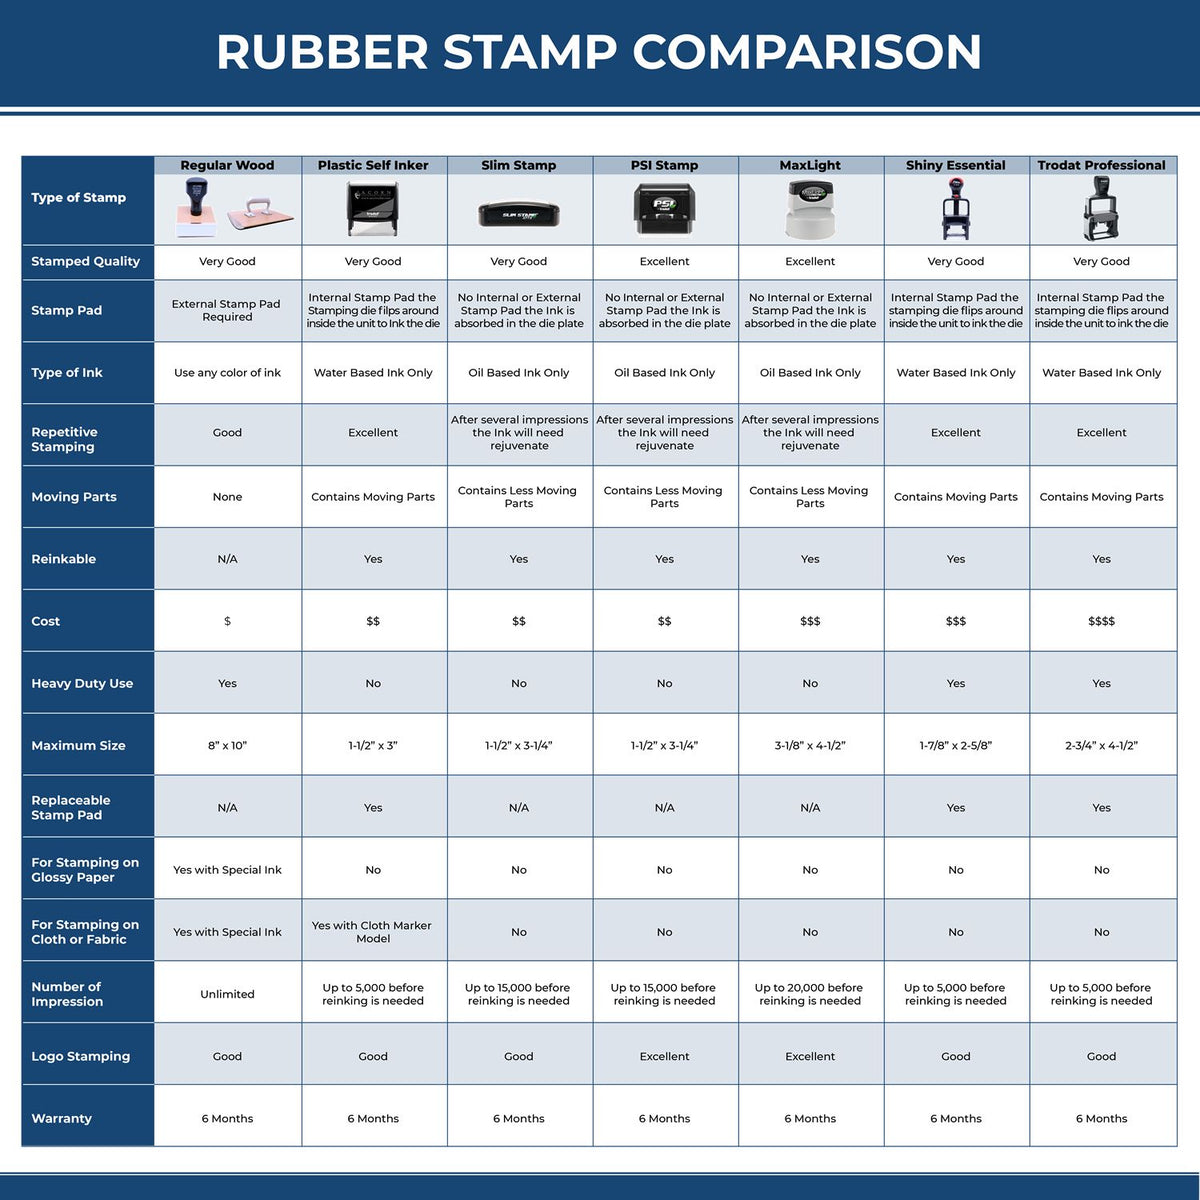 A comparison chart for the different types of mount models available for the PSI Rhode Island Notary Stamp.